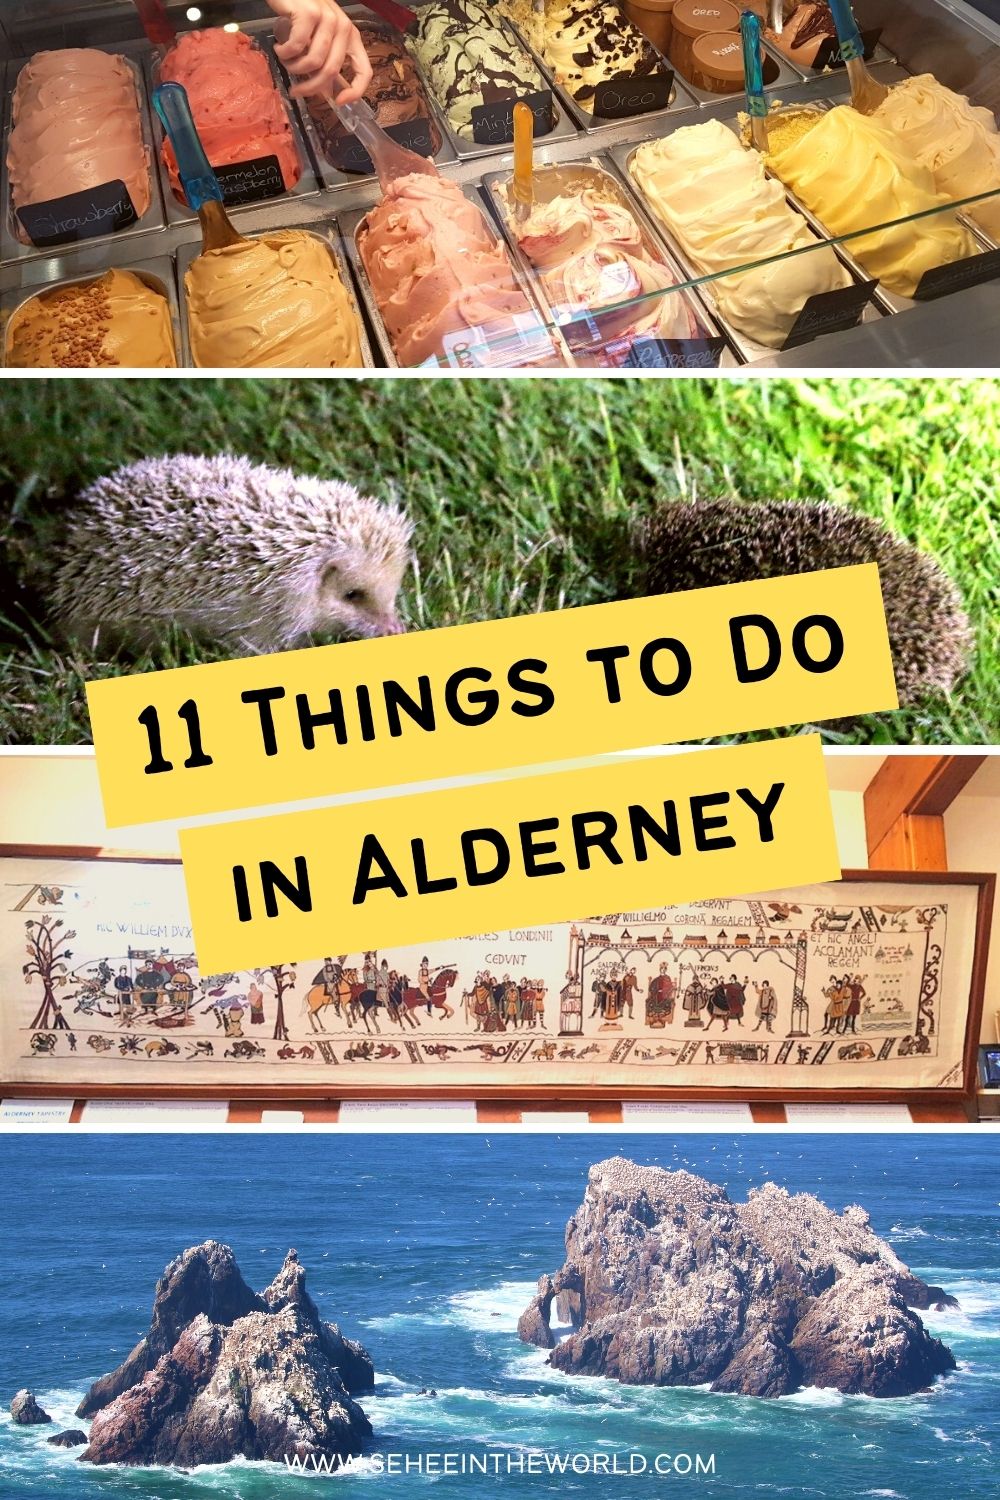 11 Things to Do in Alderney (collage) - Sehee in the World - Pinterest